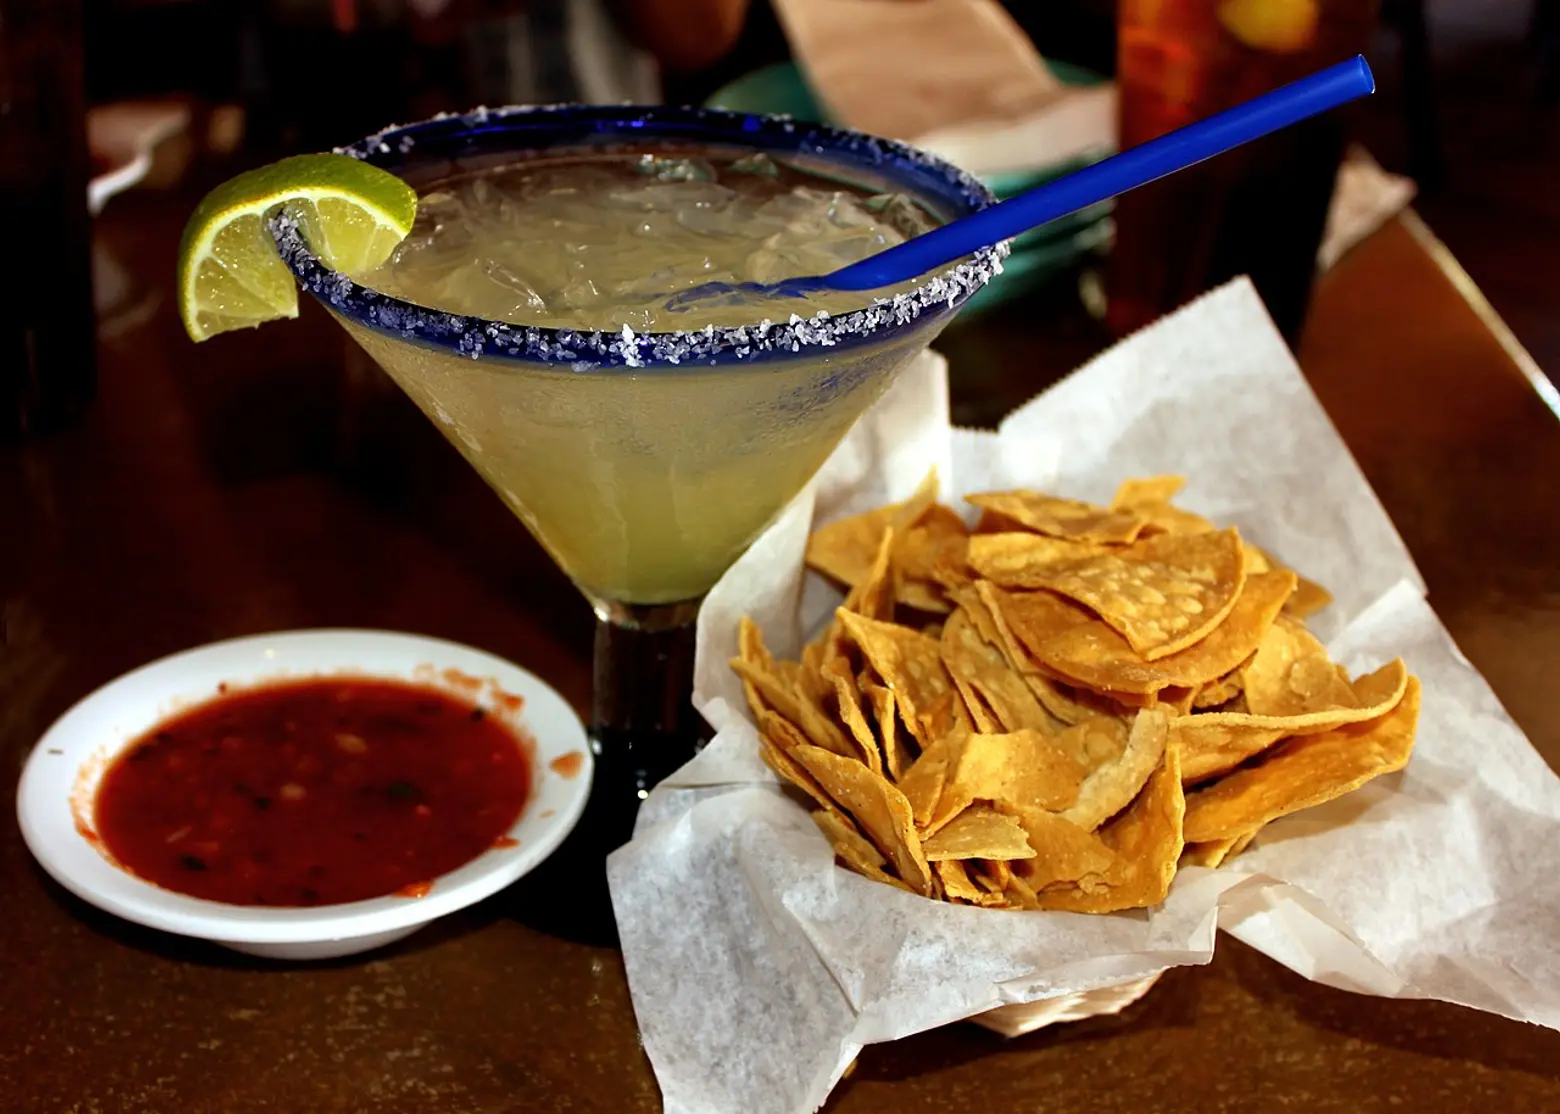 Serving chips is not enough to comply with New York’s new booze rules